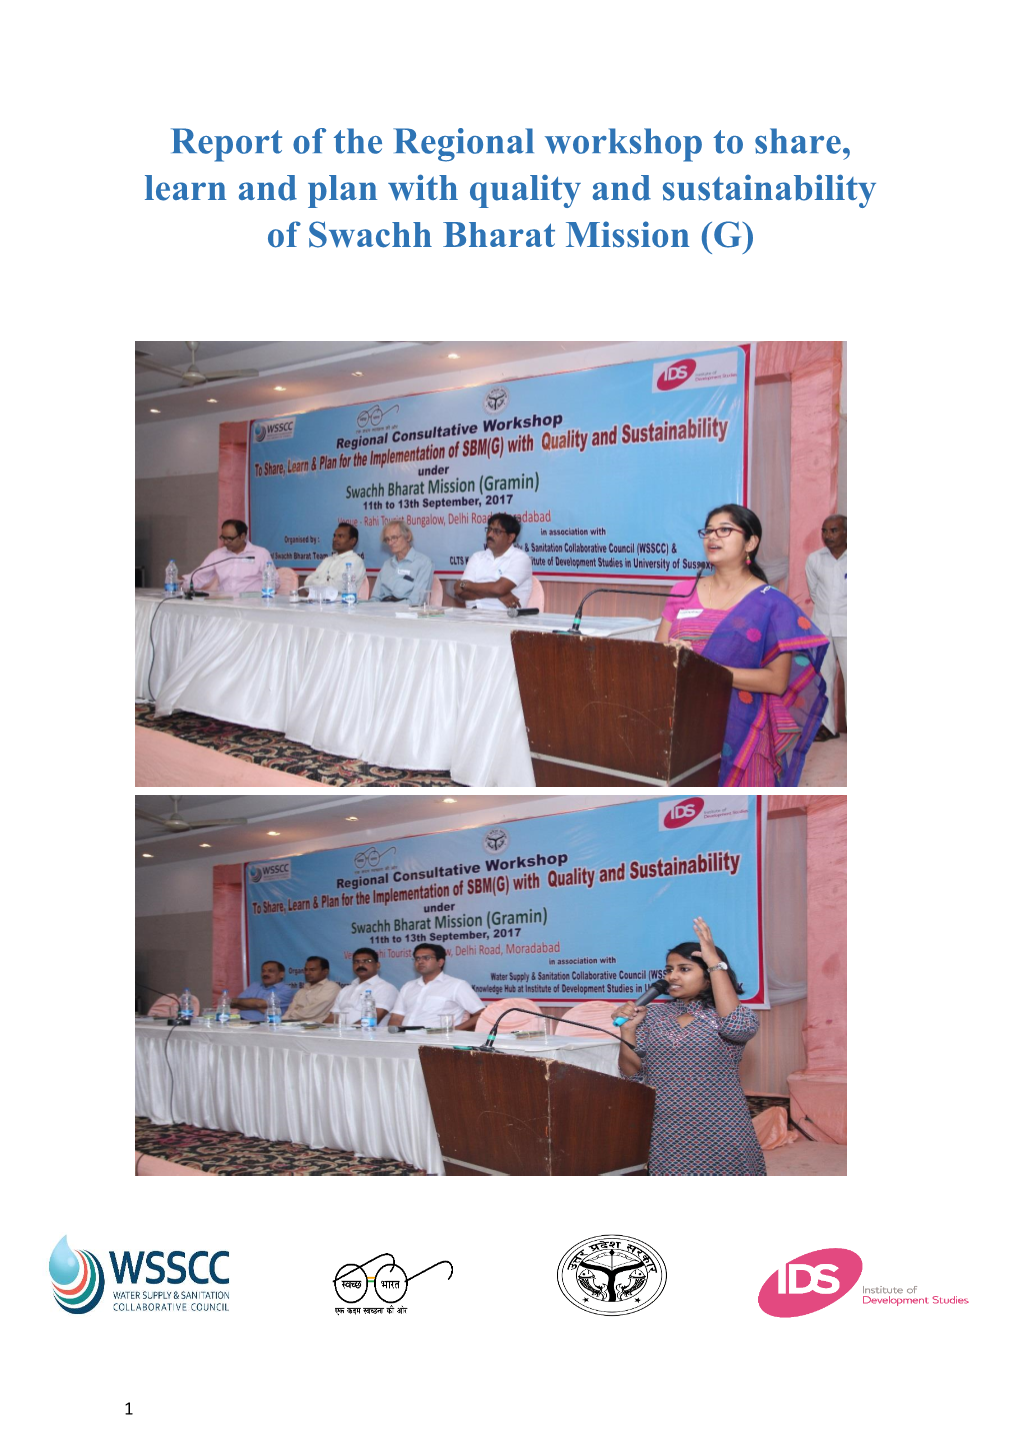 Report of the Regional Workshop to Share, Learn and Plan with Quality and Sustainability of Swachh Bharat Mission (G)